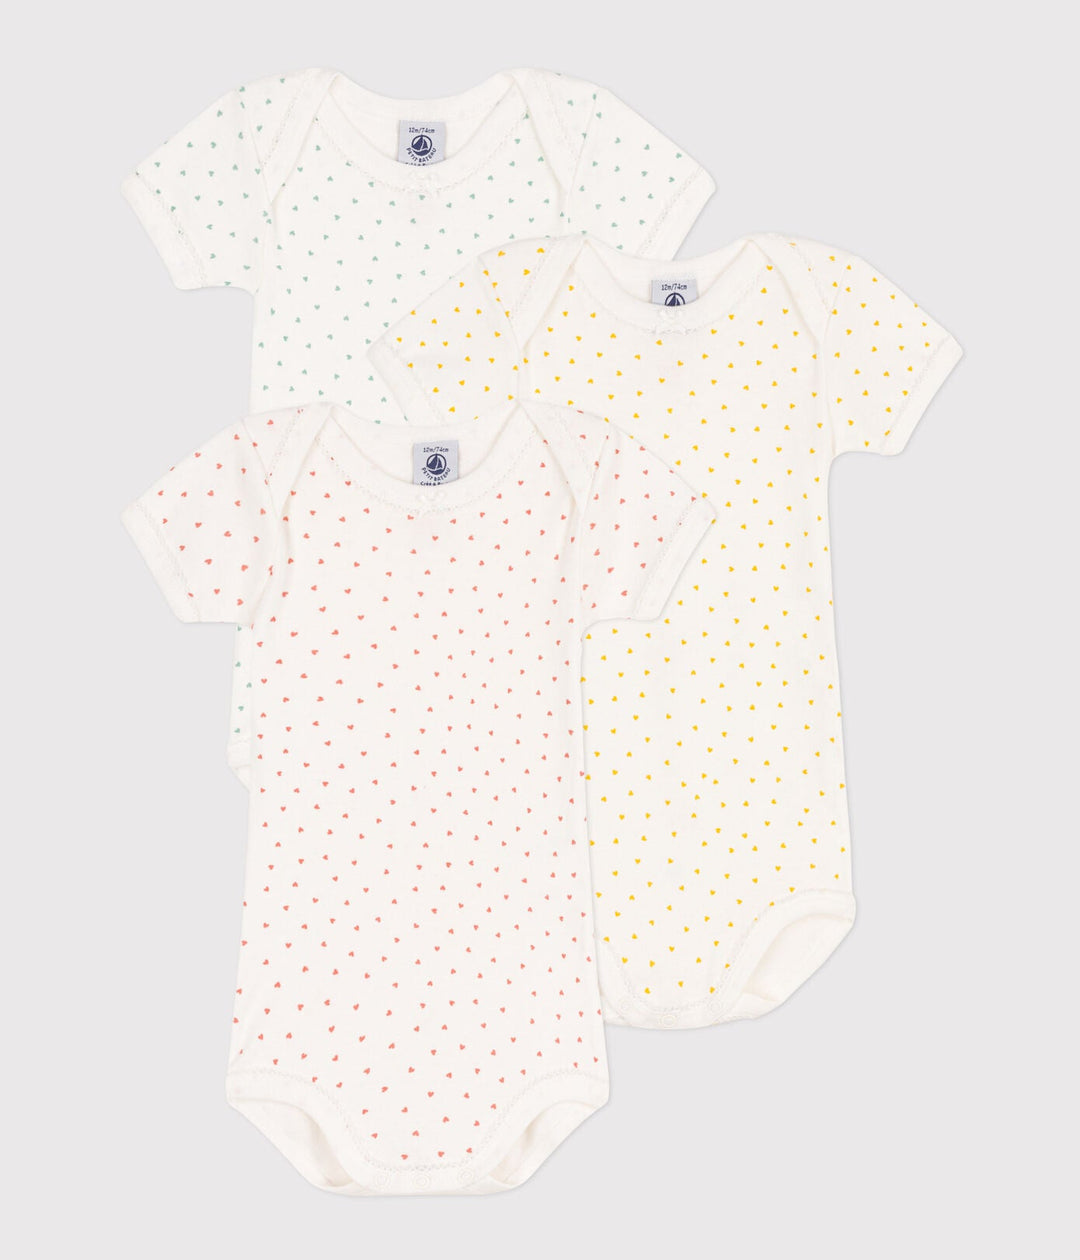 Body Hearts Yellow / Red / Grey Variante 1 (3pack)